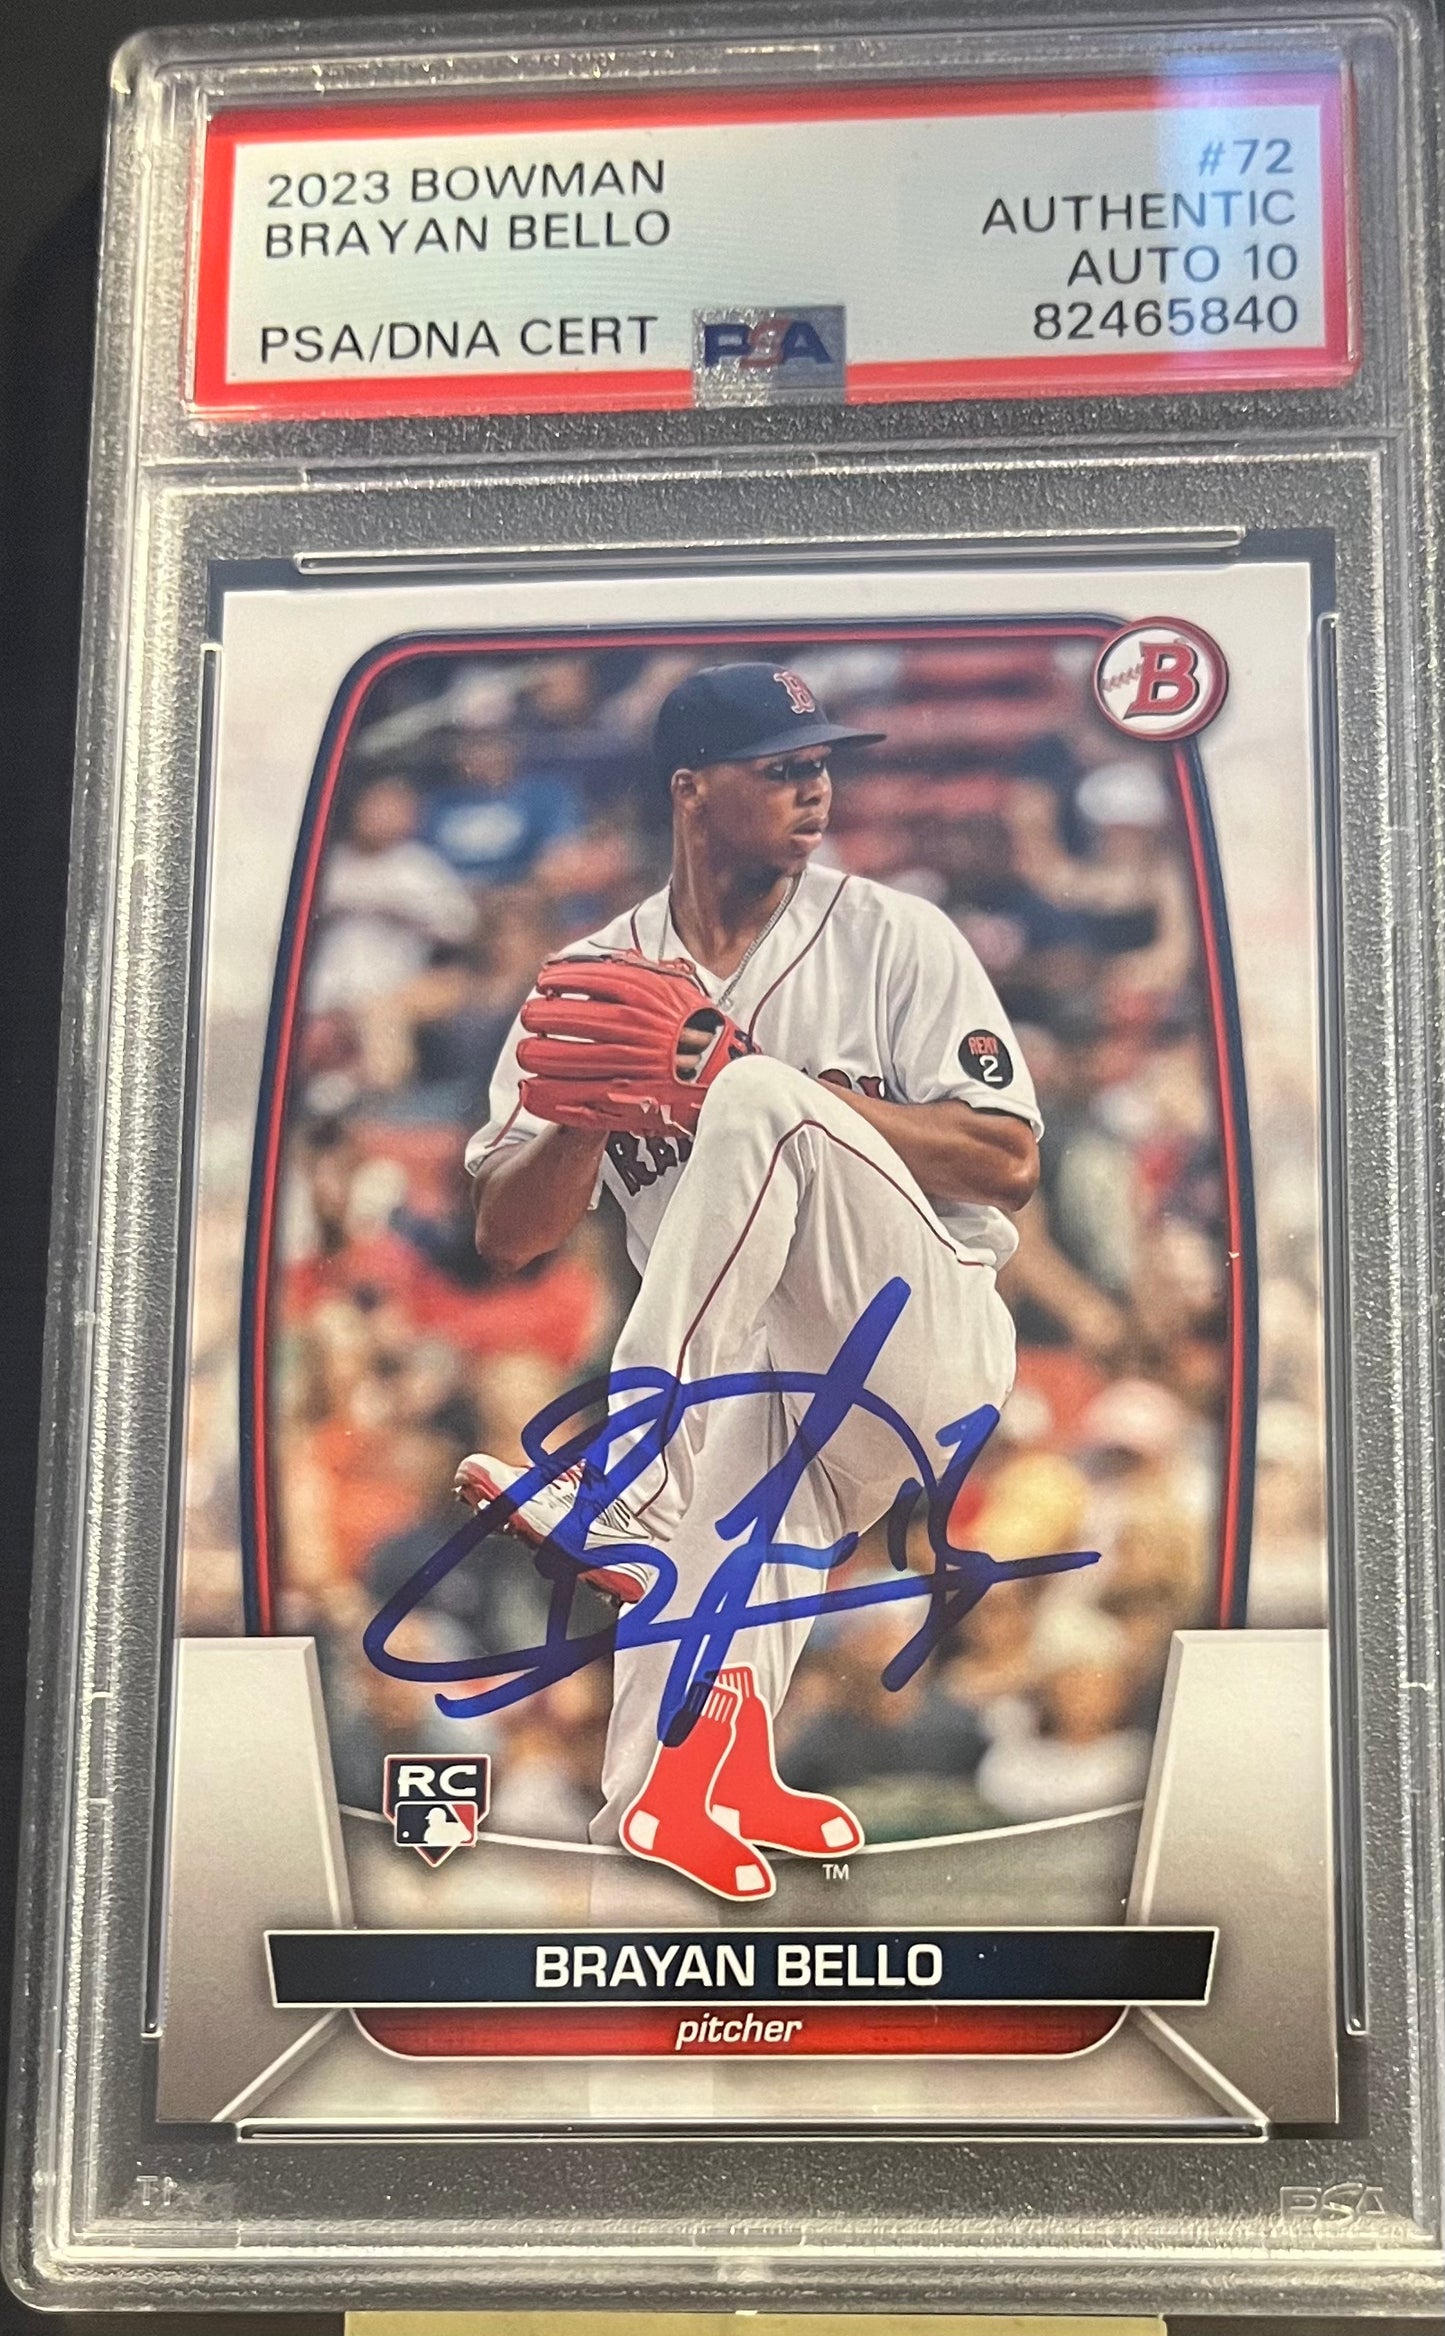 Red Sox Rookie Star Brayan Bello signed 2023 Bowman RC  PSA10